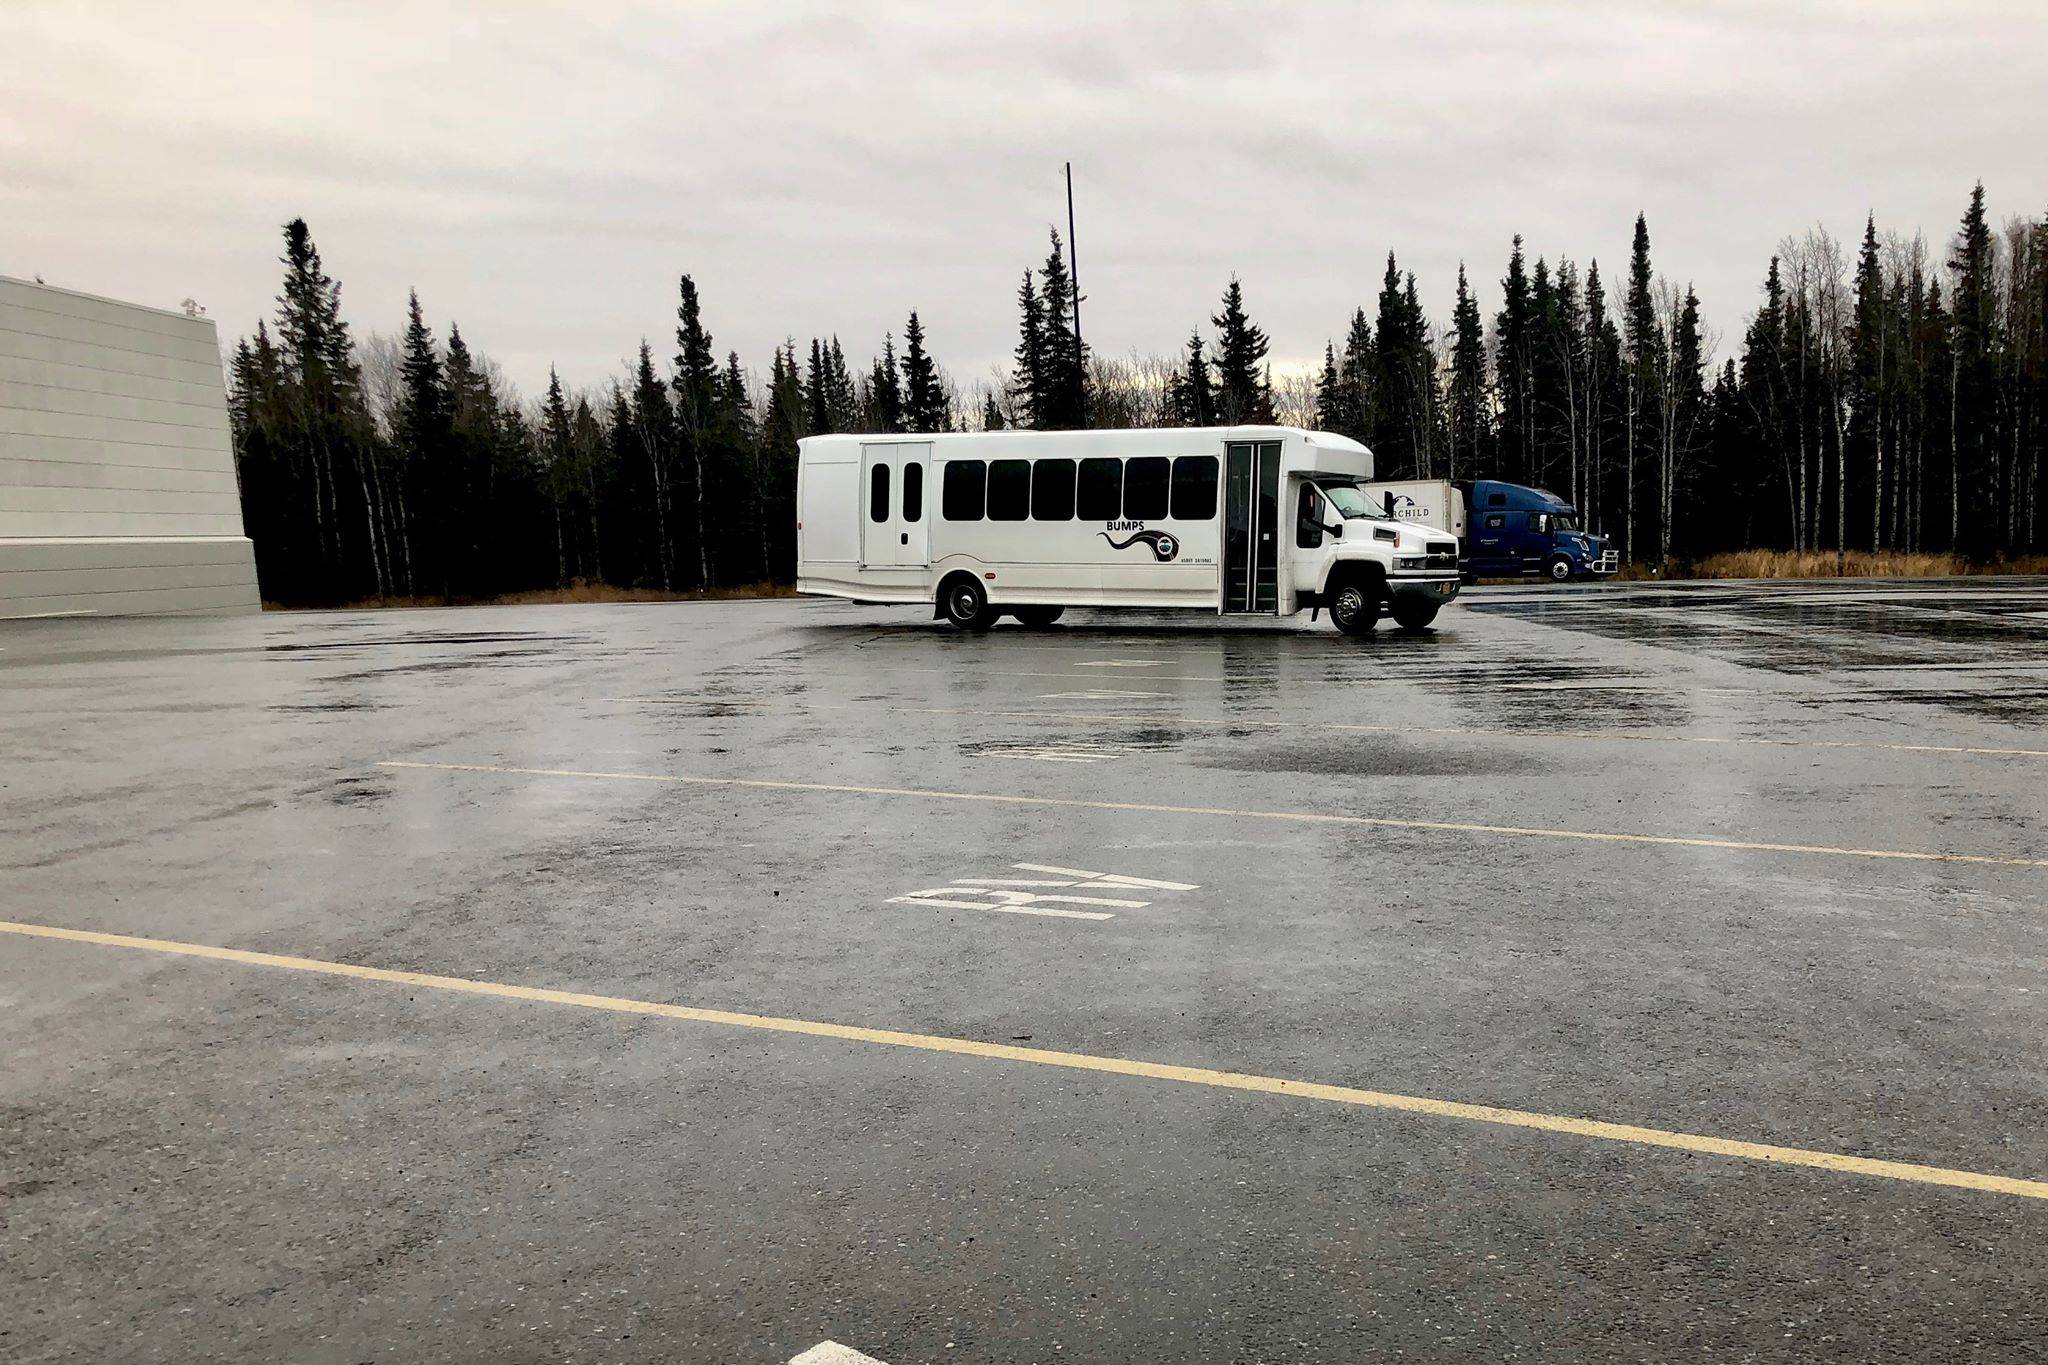 A BUMPS bus waits for passengers in the Walmart parking lot on Monday, Oct. 15, 2018, in Kenai, AK. (Photo by Victoria Petersen/Peninsula Clarion)